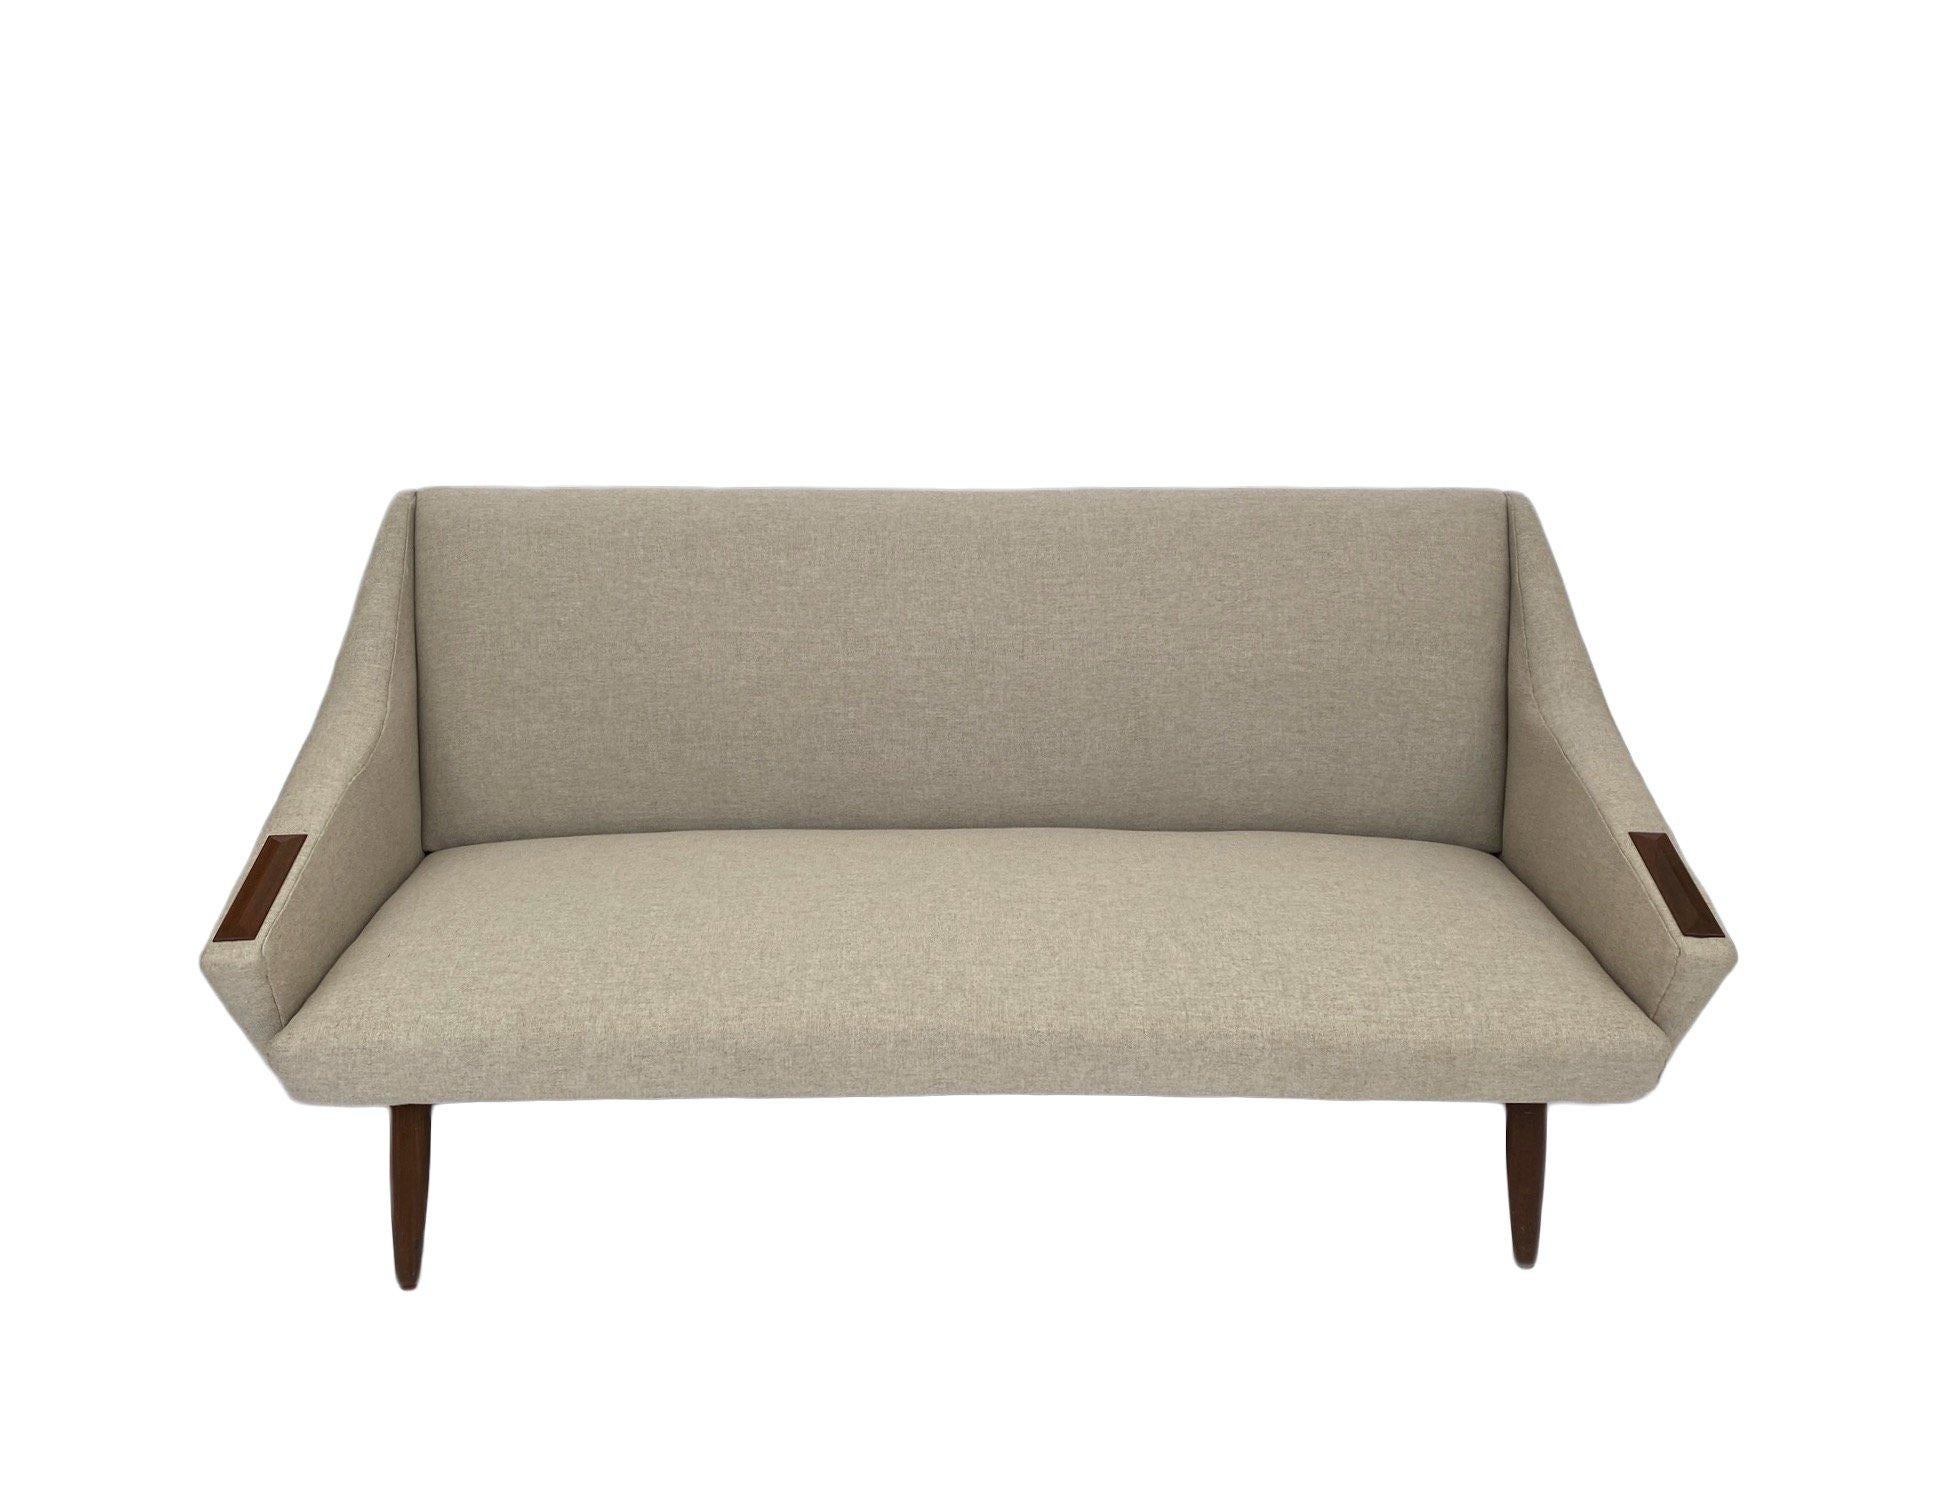 A beautiful Danish cream wool 3 seater sofa with teak paws, this would make a stylish addition to any living or work area.

The sofa has a padded backrest and teak armrests for enhanced comfort. A striking piece of classic Scandinavian